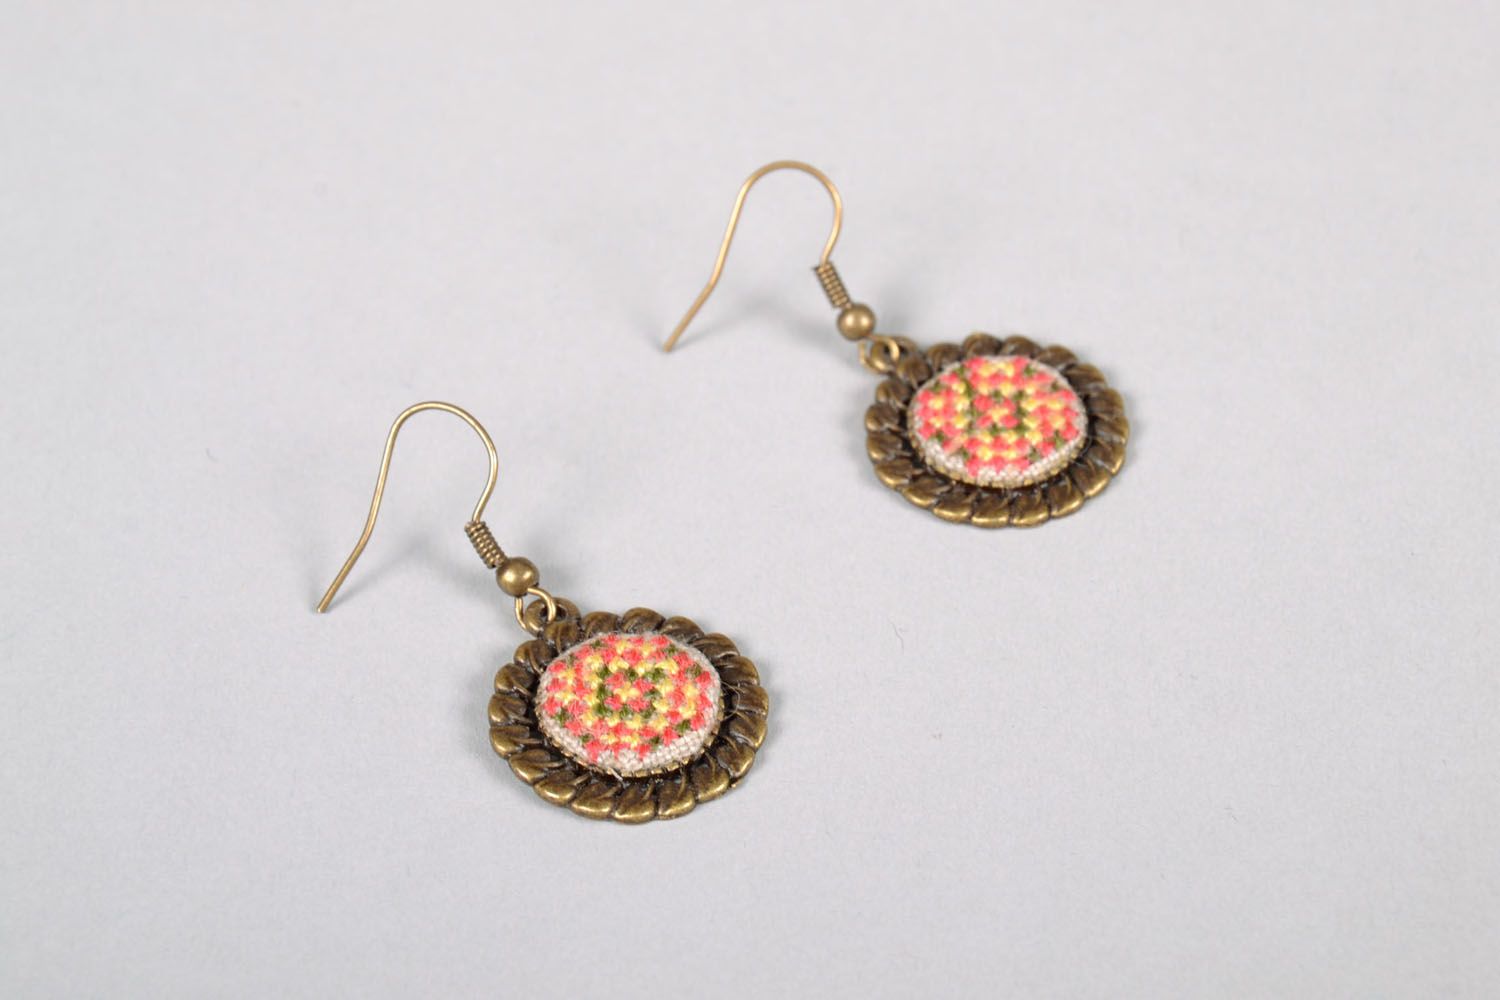 Earrings with cross stitch embroidery photo 3